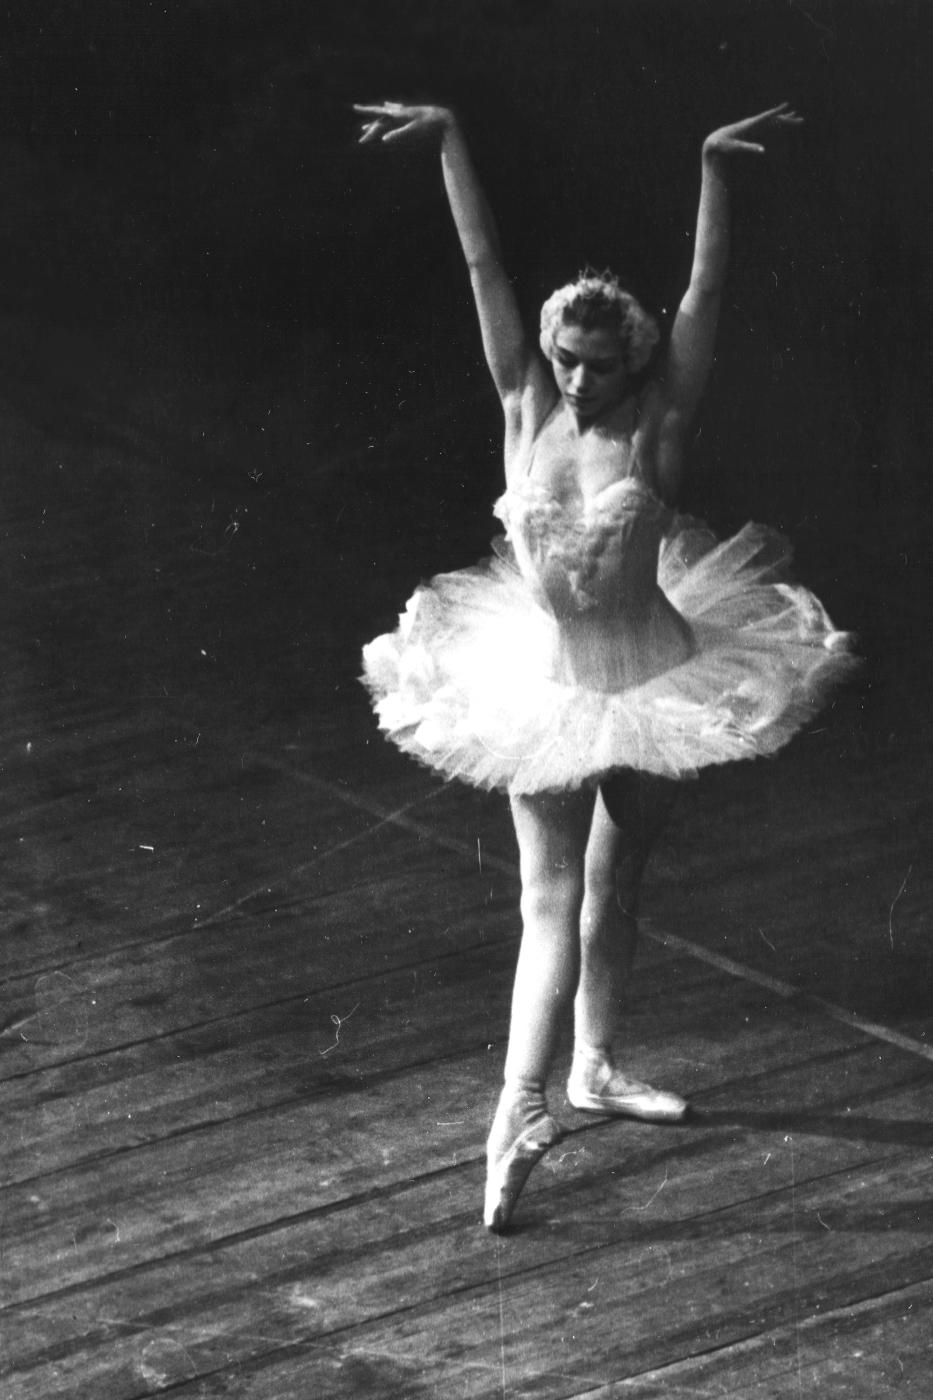 2. M.Drodzdova (Odette), “Swan Lake” by V.Burmeister and L.Ivanov, Ballet of the Stanislavsky and Nemirovich-Danchenko Moscow Music Theatre © Stanislavsky and Nemirovich-Danchenko Moscow Music Theatre 